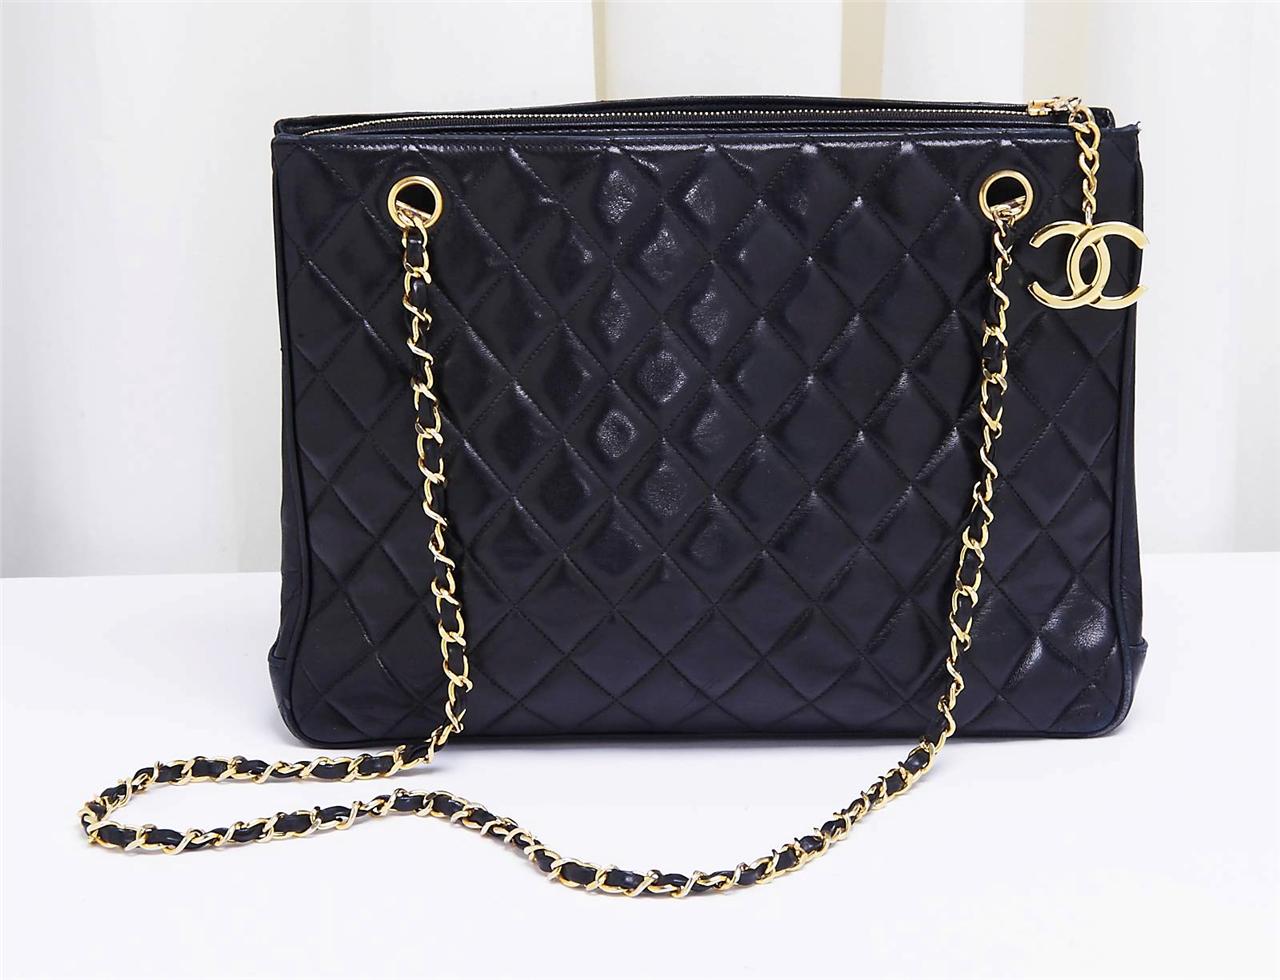 CHANEL Vintage Classic Quilted Black Leather Tote Gold Chain Bag Handbag Purse | eBay